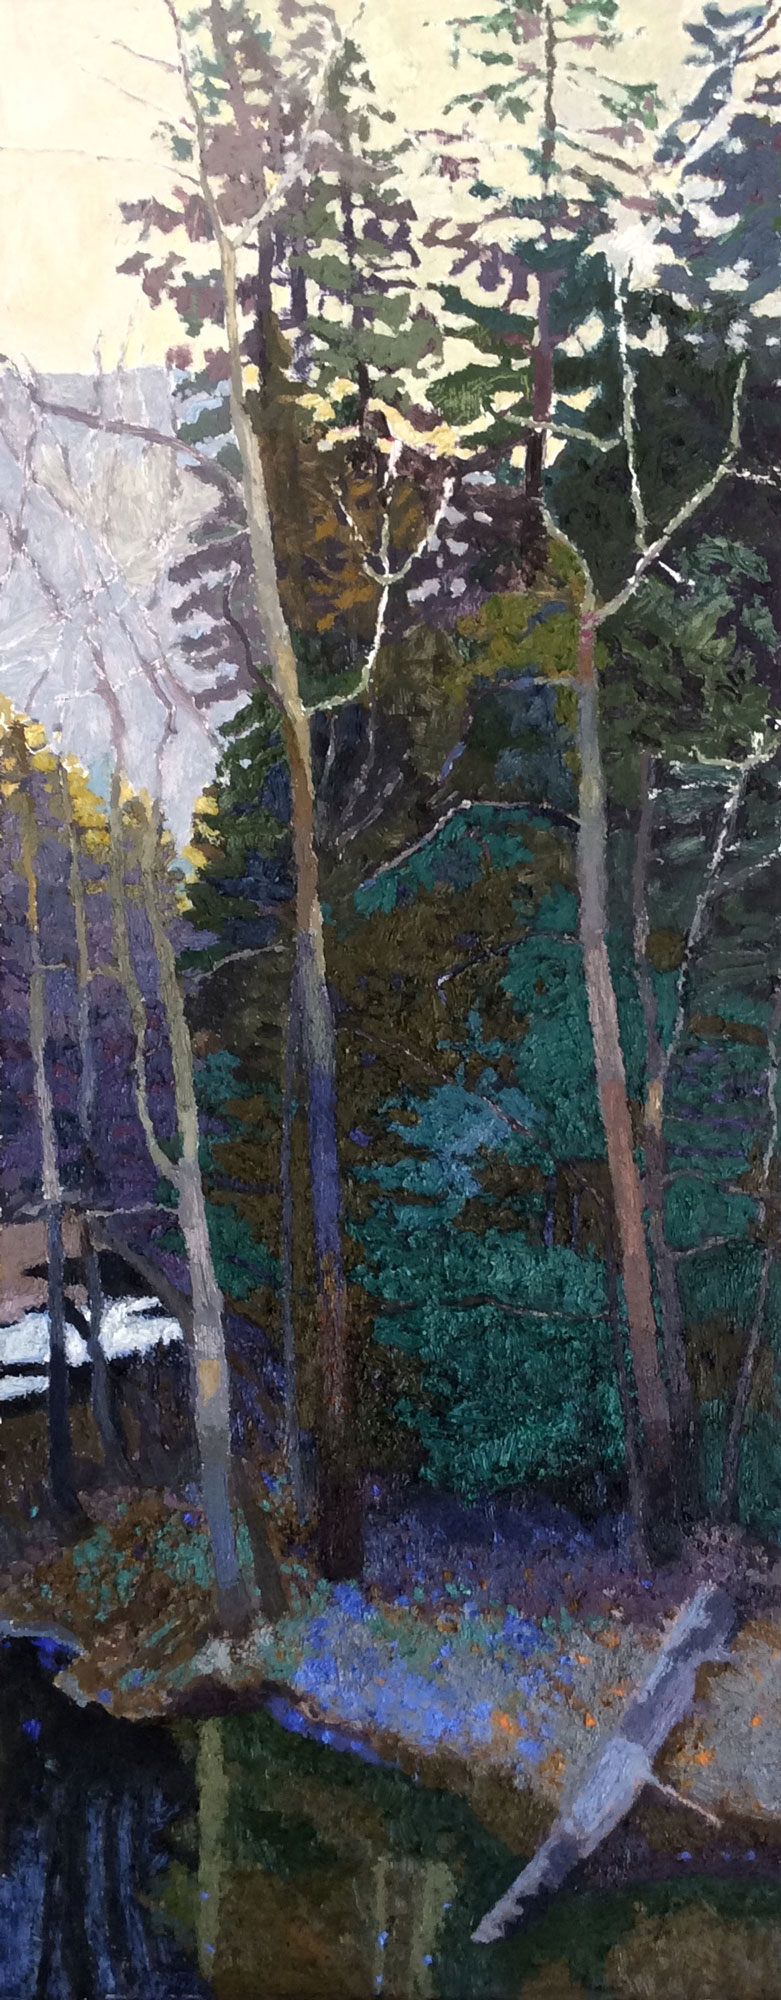 Dry Winter on the Merced, 2018, Oil on Canvas, 36" x 14"